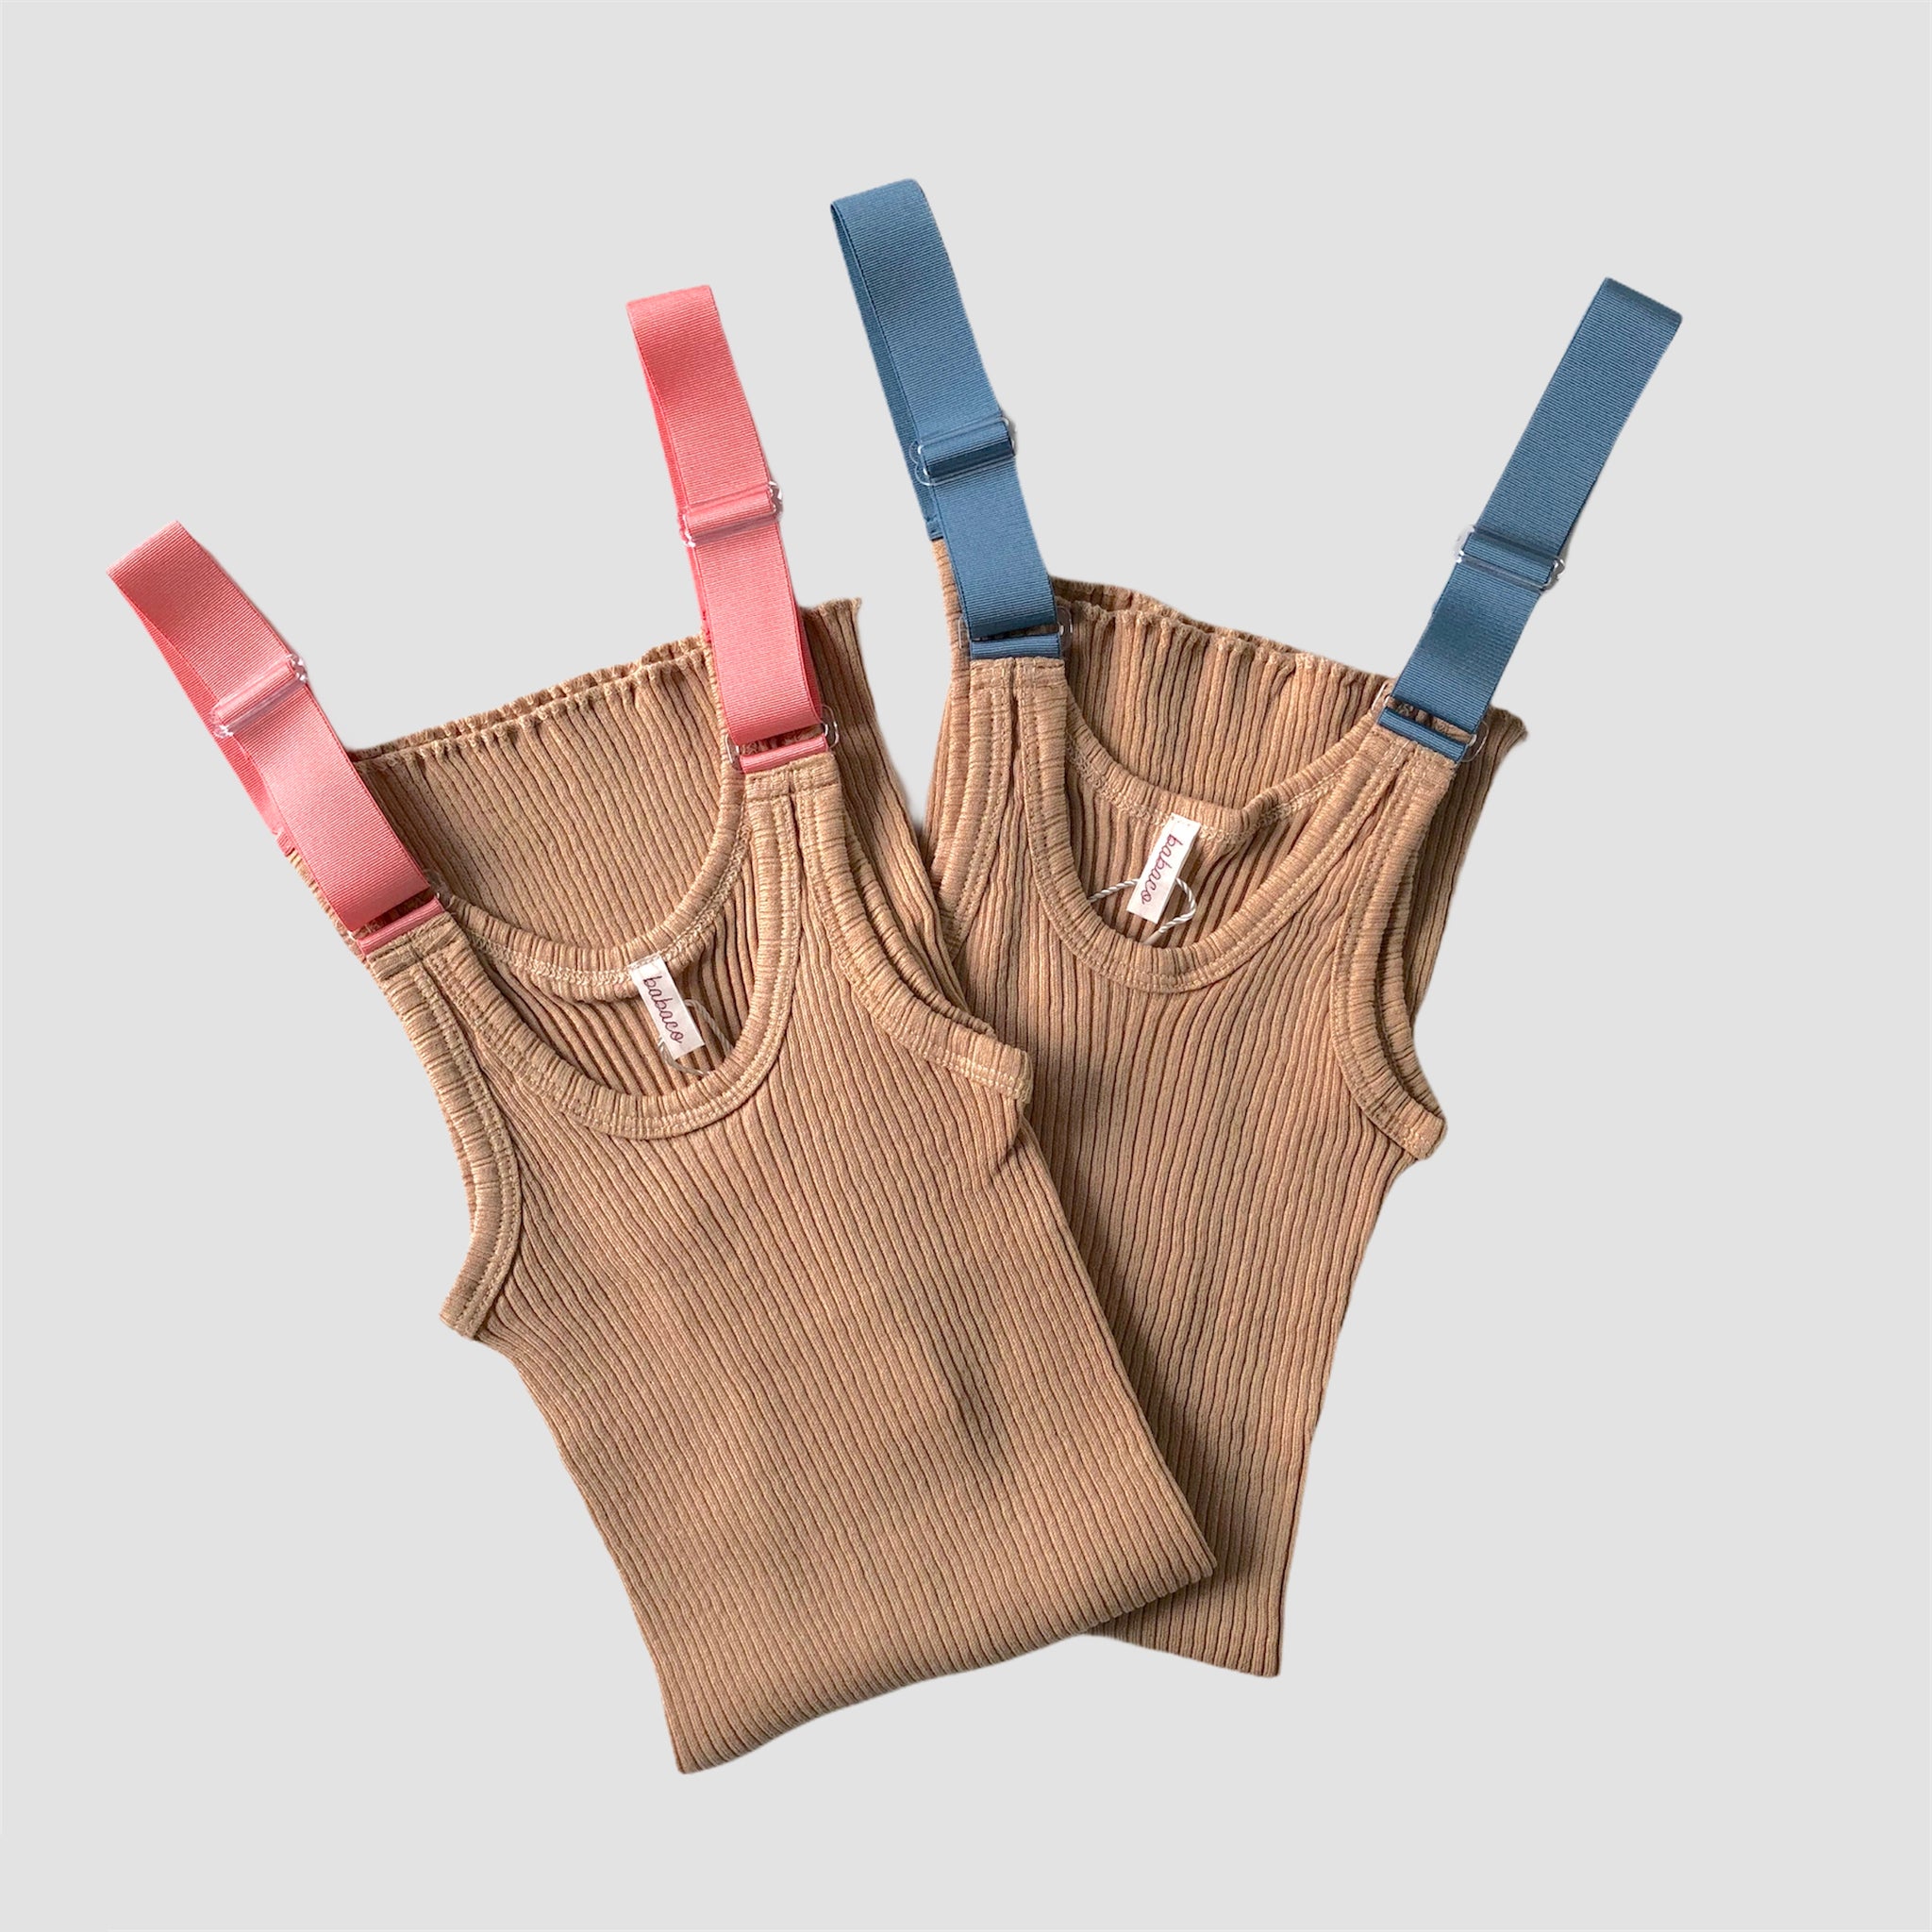 [babaco] FINE COTTON RIBBED CAMISOLE (CORAL PINK)